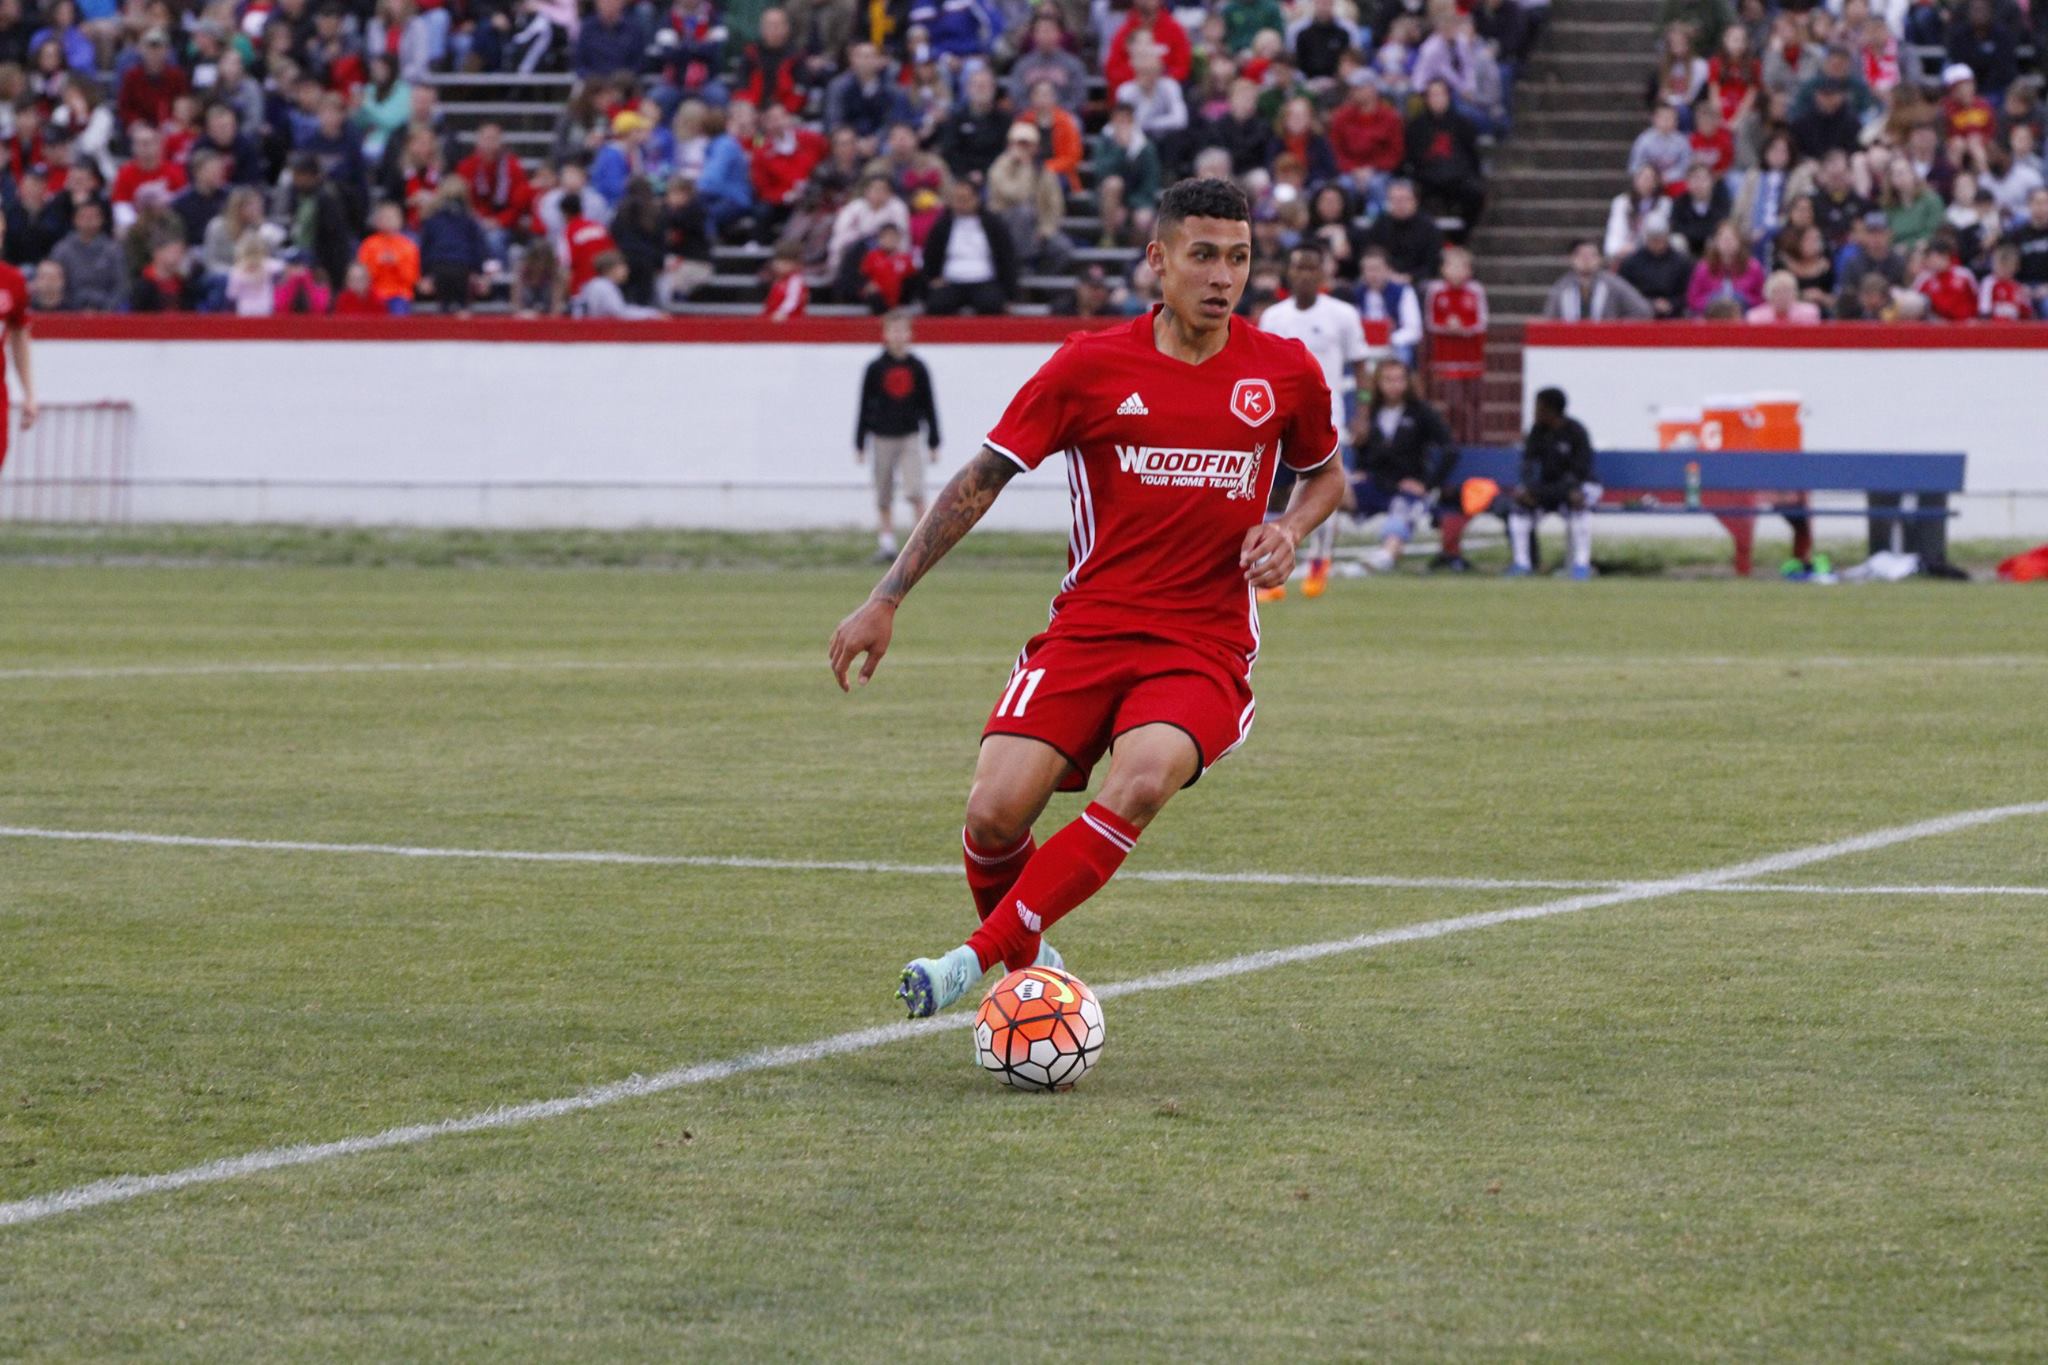 Richmond Kickers Opening Day Preview Kickers beat Harrisburg 31